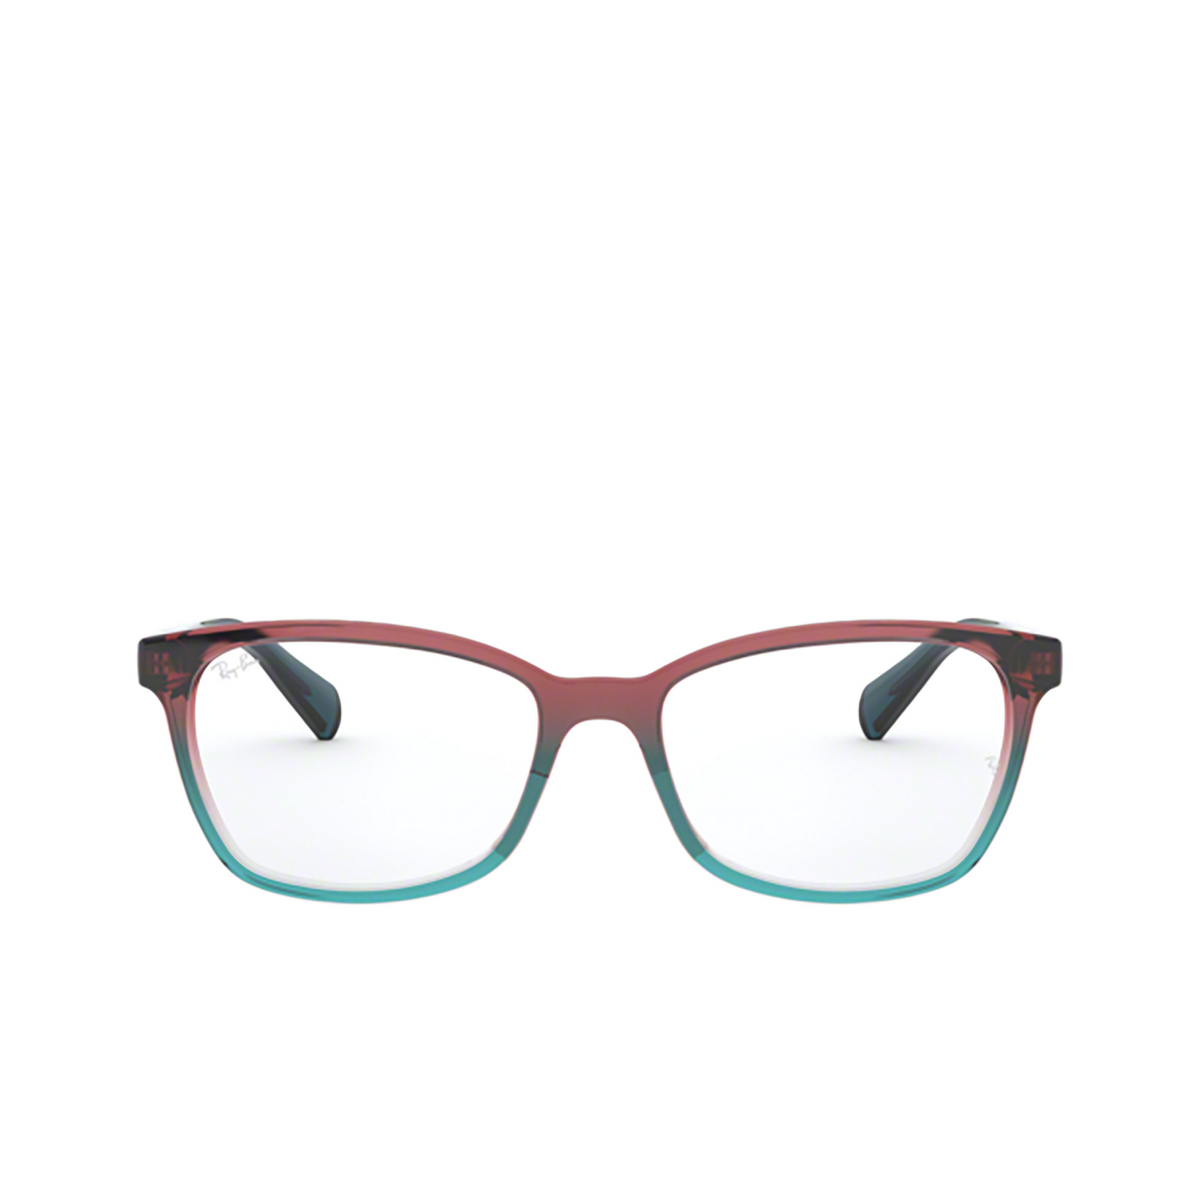 Ray-Ban RX5362 Eyeglasses 5834 BLUE / RED / LIGHT BLUE GRADIENT - front view